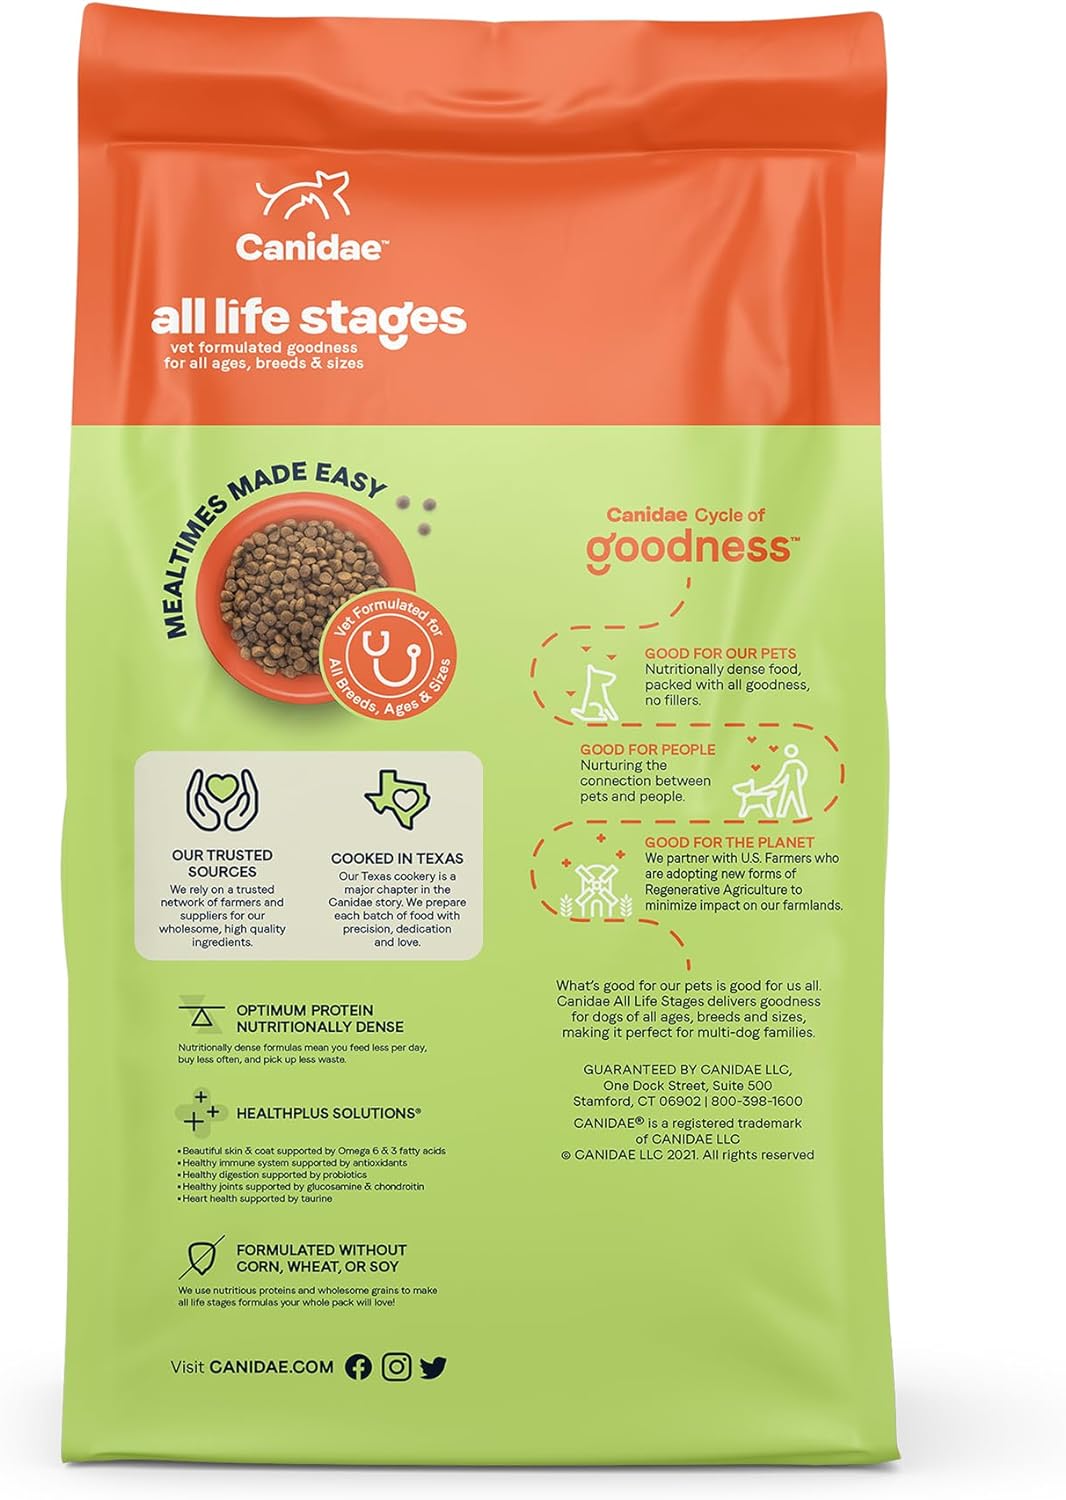 Canidae All Life Stages Less Active Formula Canidae Platinum Chicken, Turkey, Lamb, & Fish Meals Dry Dog Food – Gallery Image 3